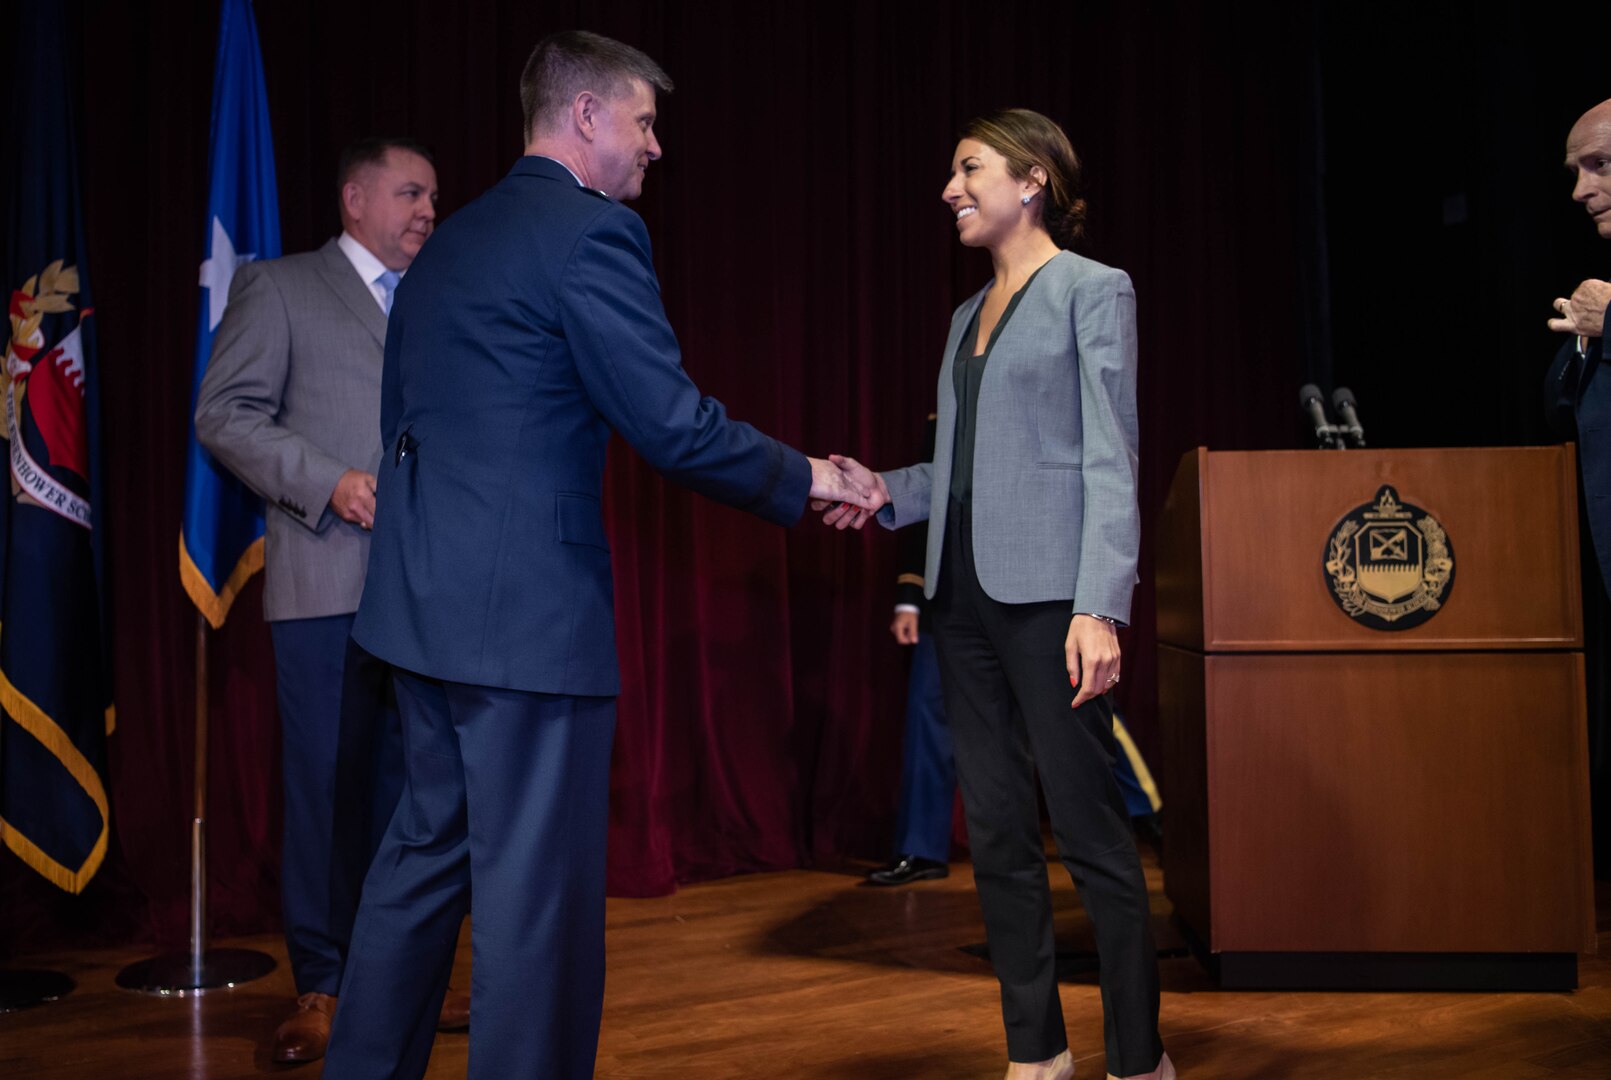 The Eisenhower School Awards Ceremony, held ing Baruch Auditorium on June 10, 2019. Vice Admiral Fritz Roegge, NDUP, was in attendence.